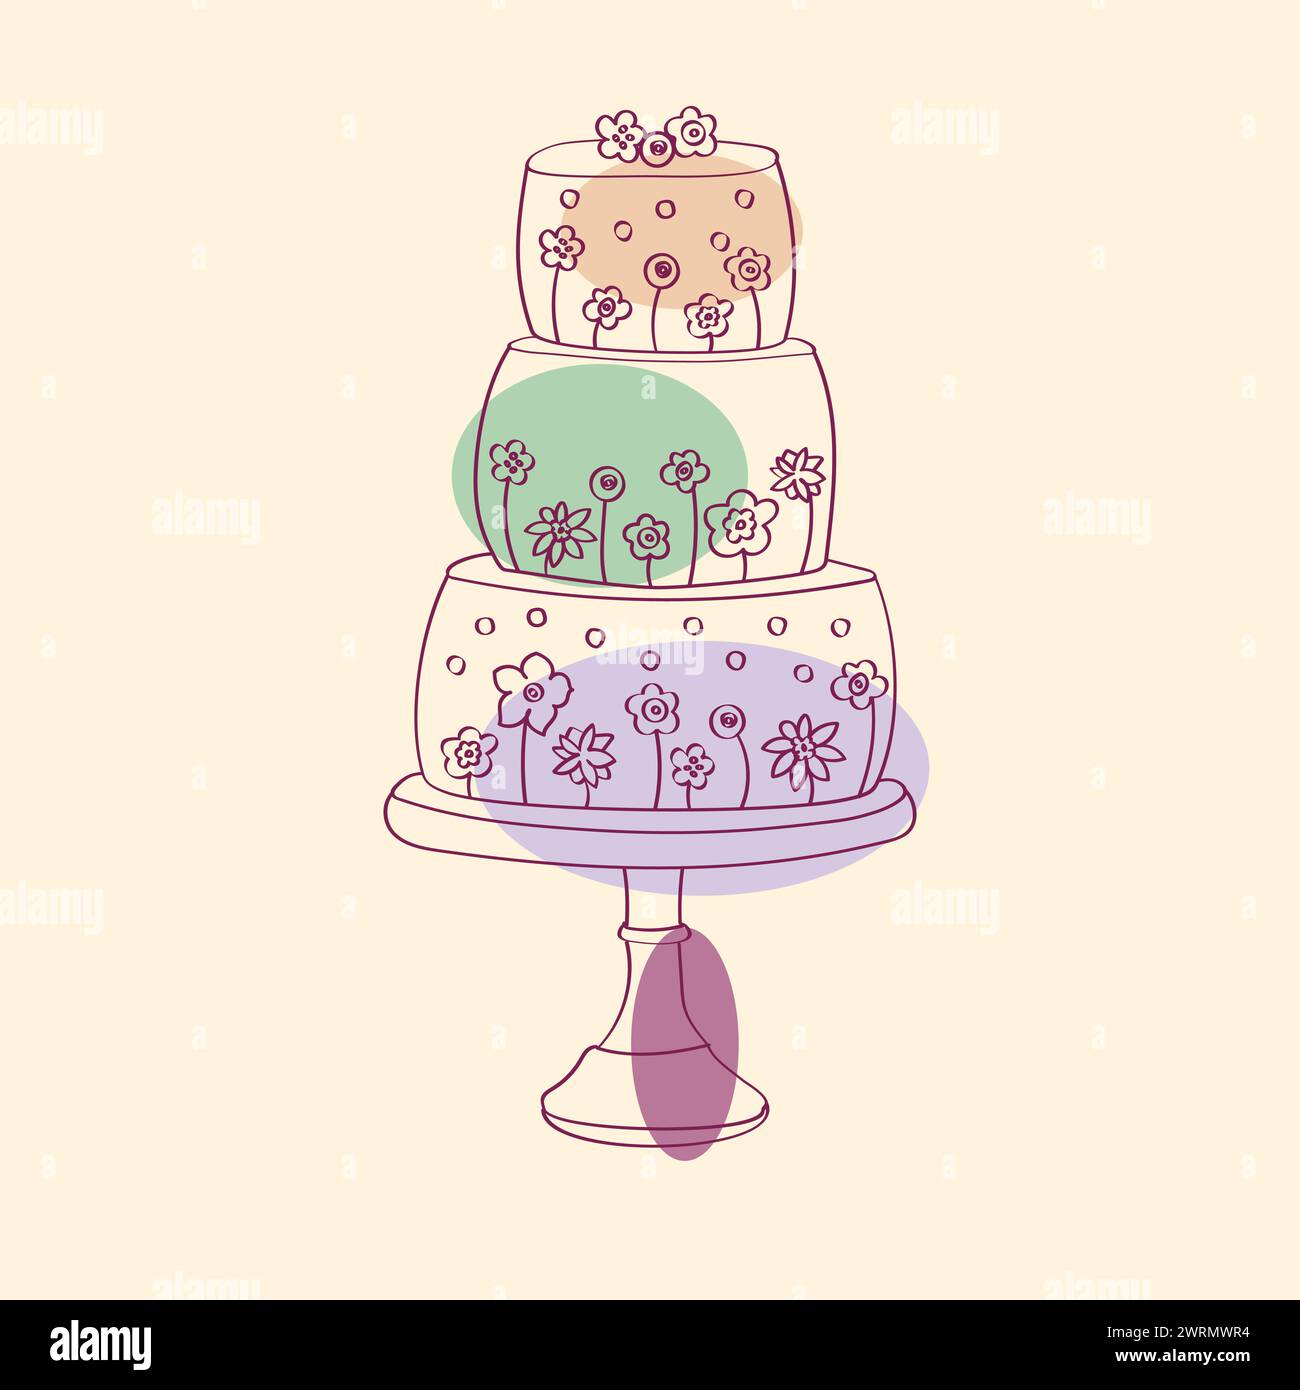 A three-layer cake with icing and decorations ready to be served. The cake is colorful and inviting, with different flavors and textures visible on each layer Stock Vector